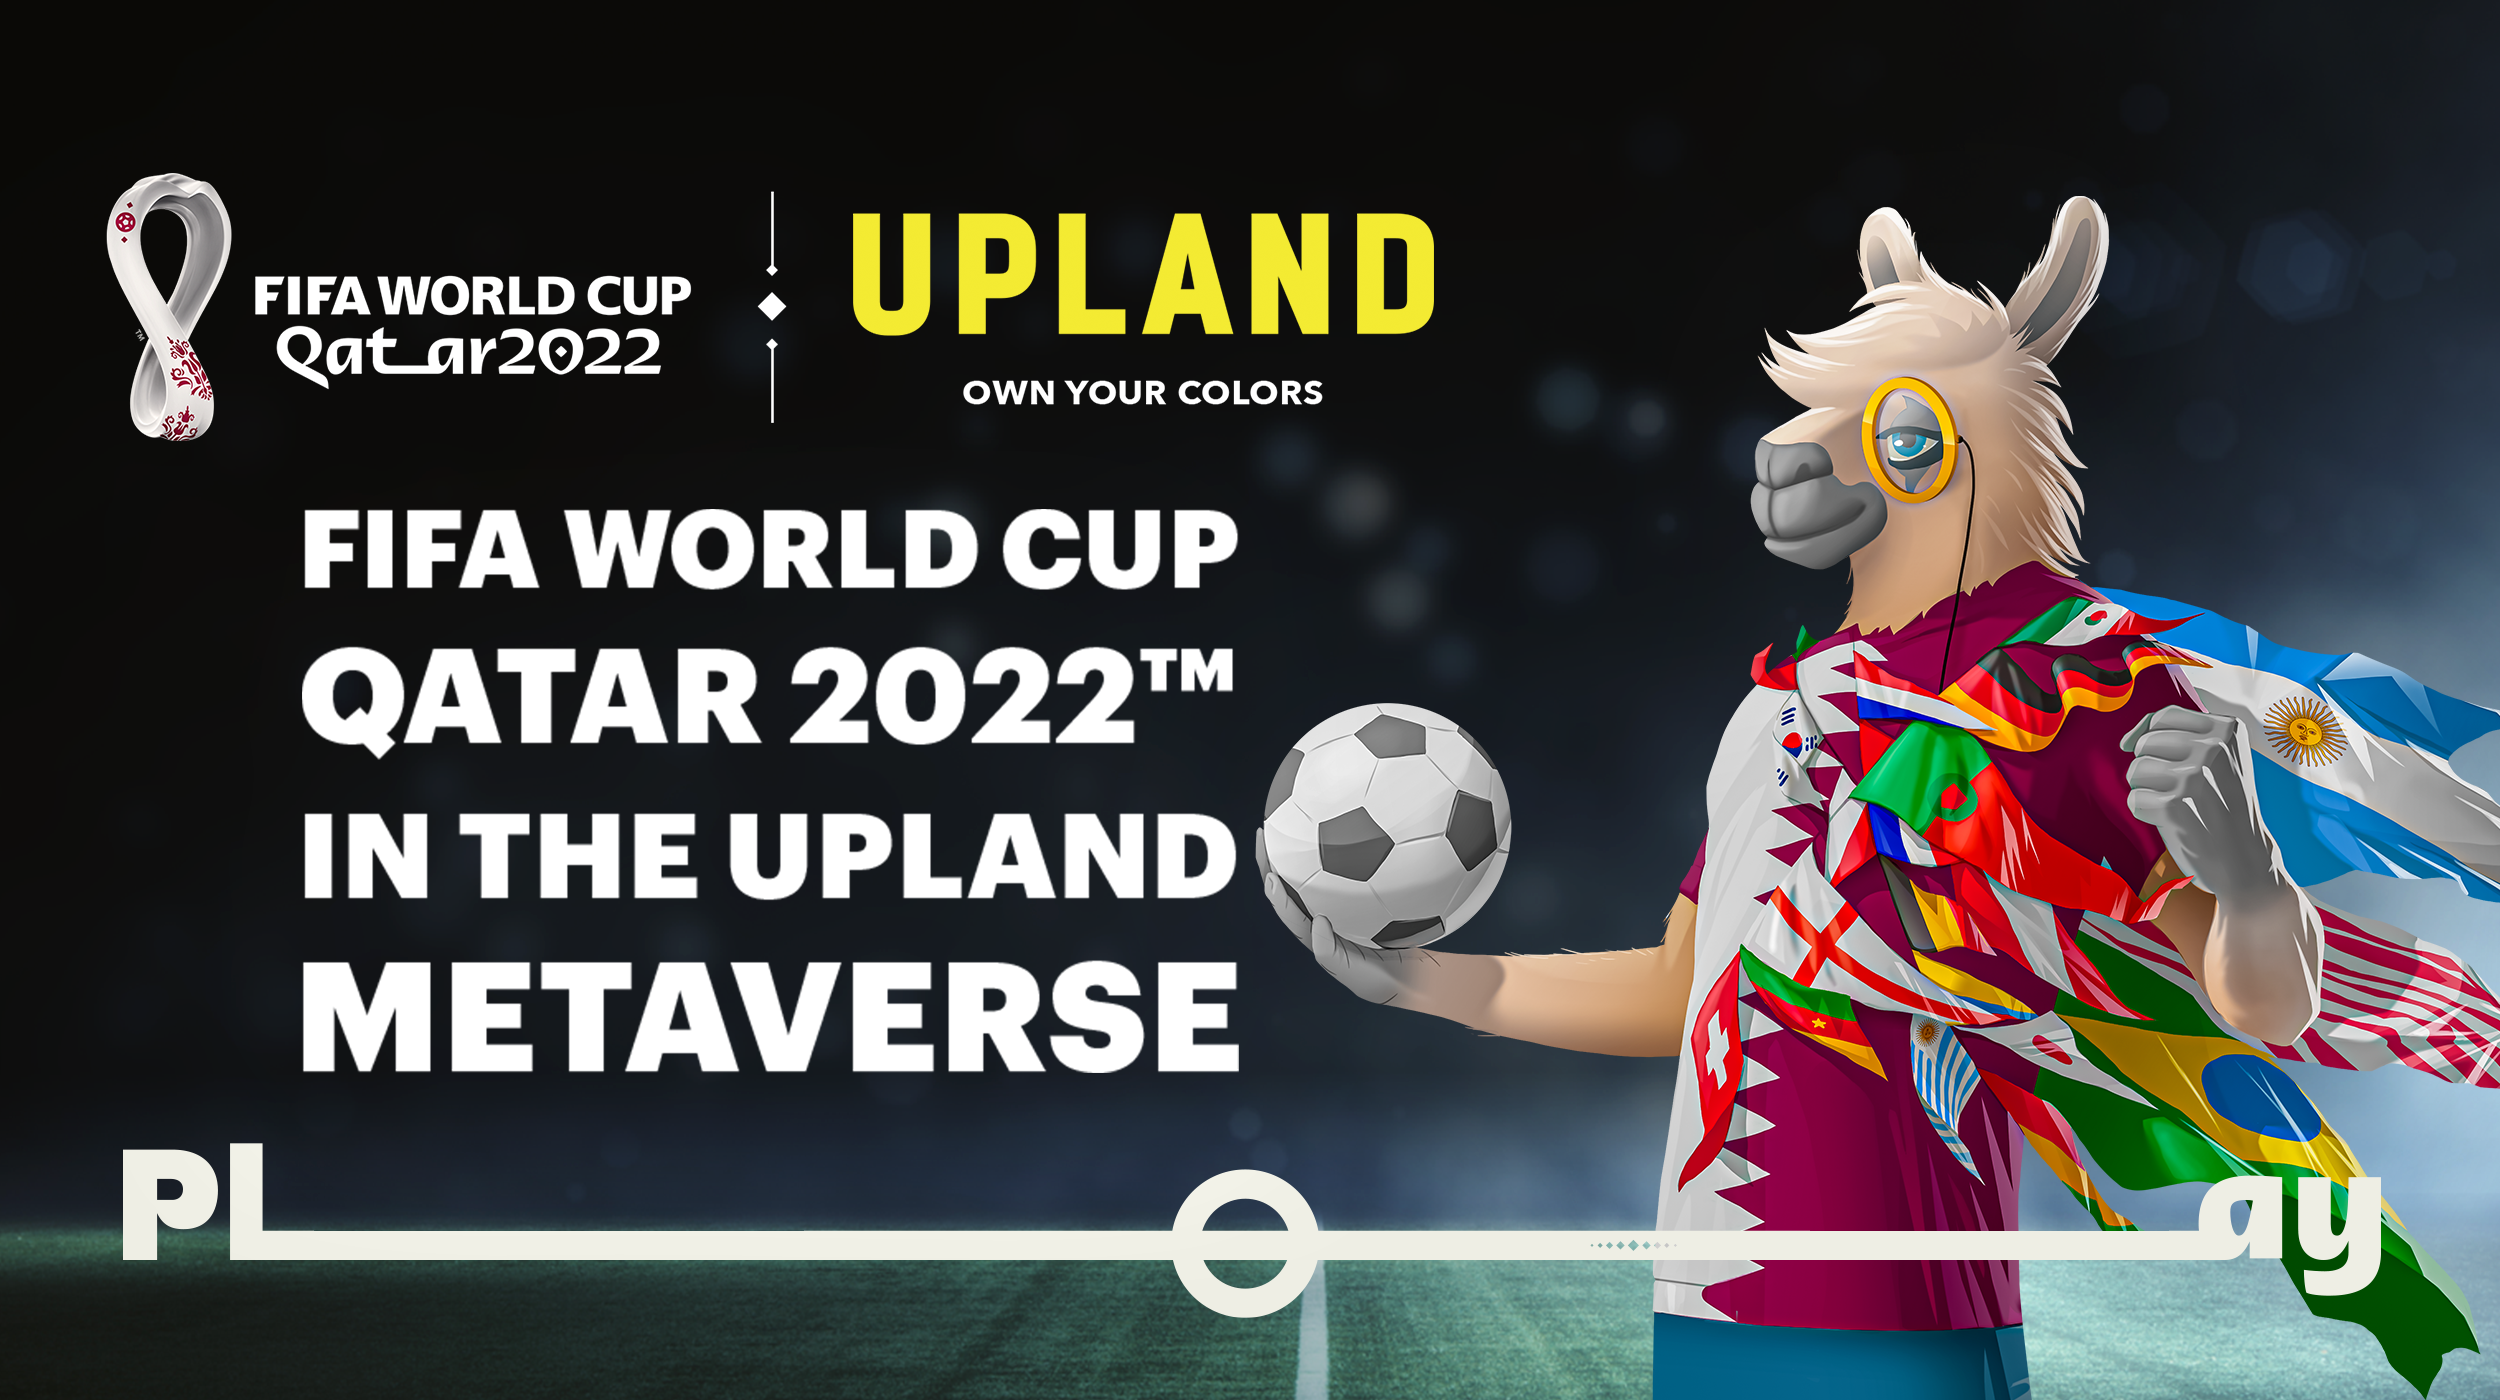 FIFA World Cup 2022 FIFA Inks Metaverse Partnership With Upland